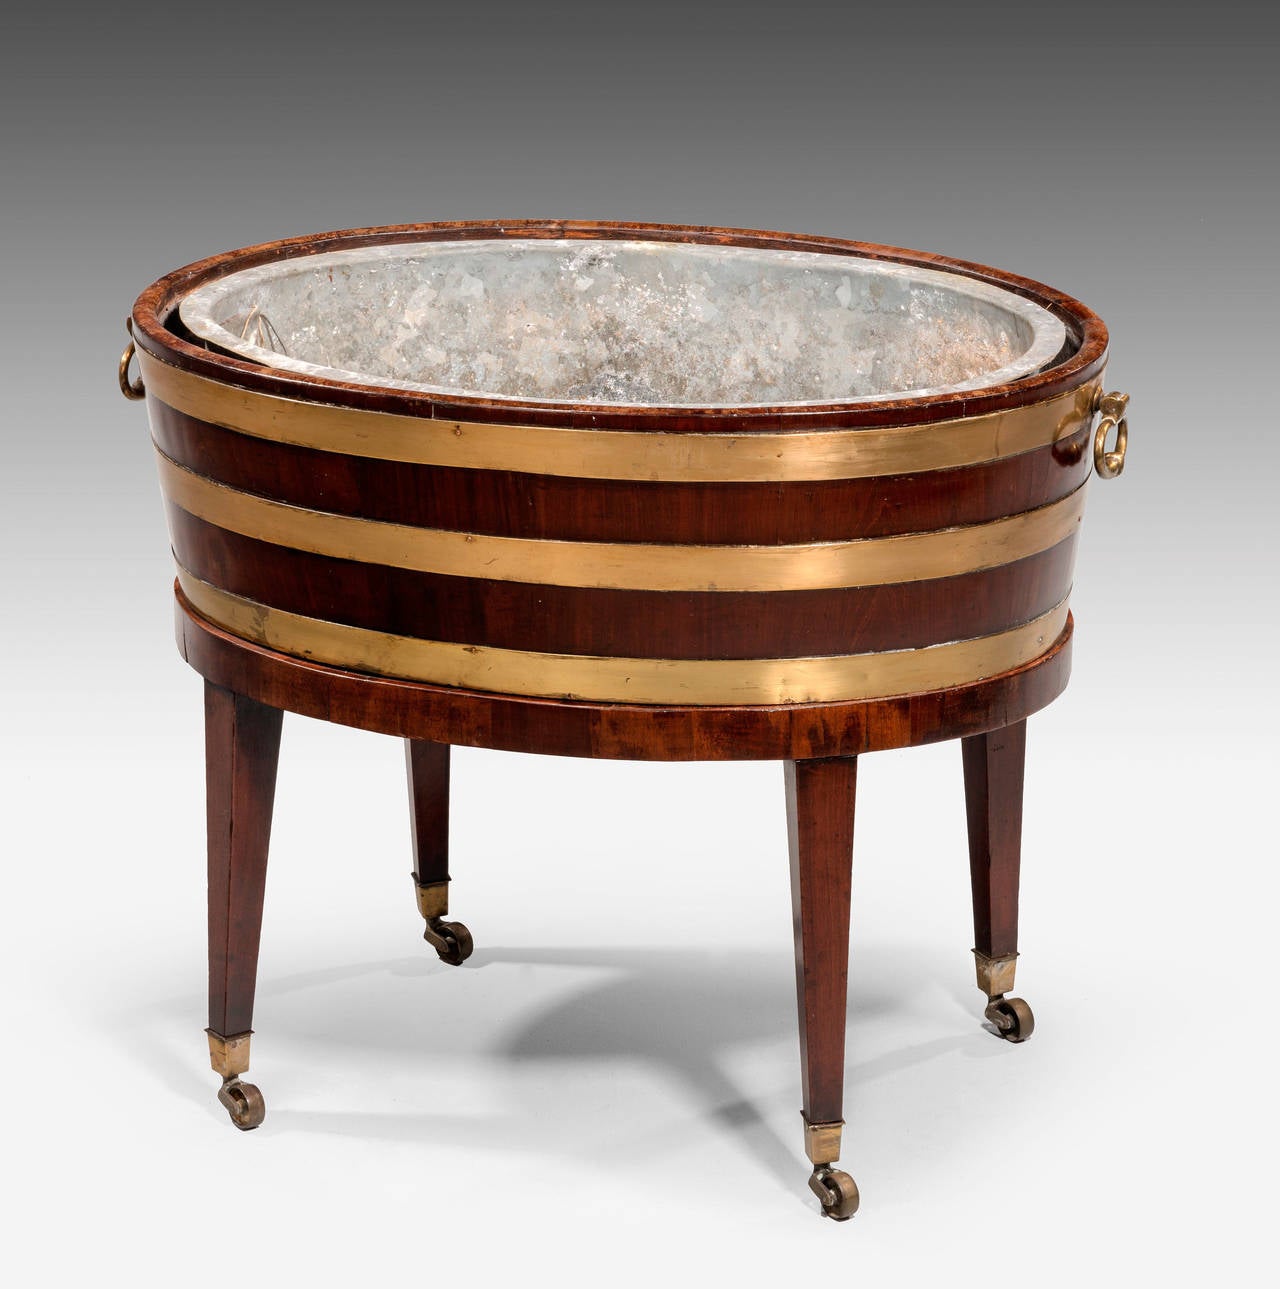 Attractive Mahogany 18th Century Brass Bound Wine Cooler In Good Condition In Peterborough, Northamptonshire